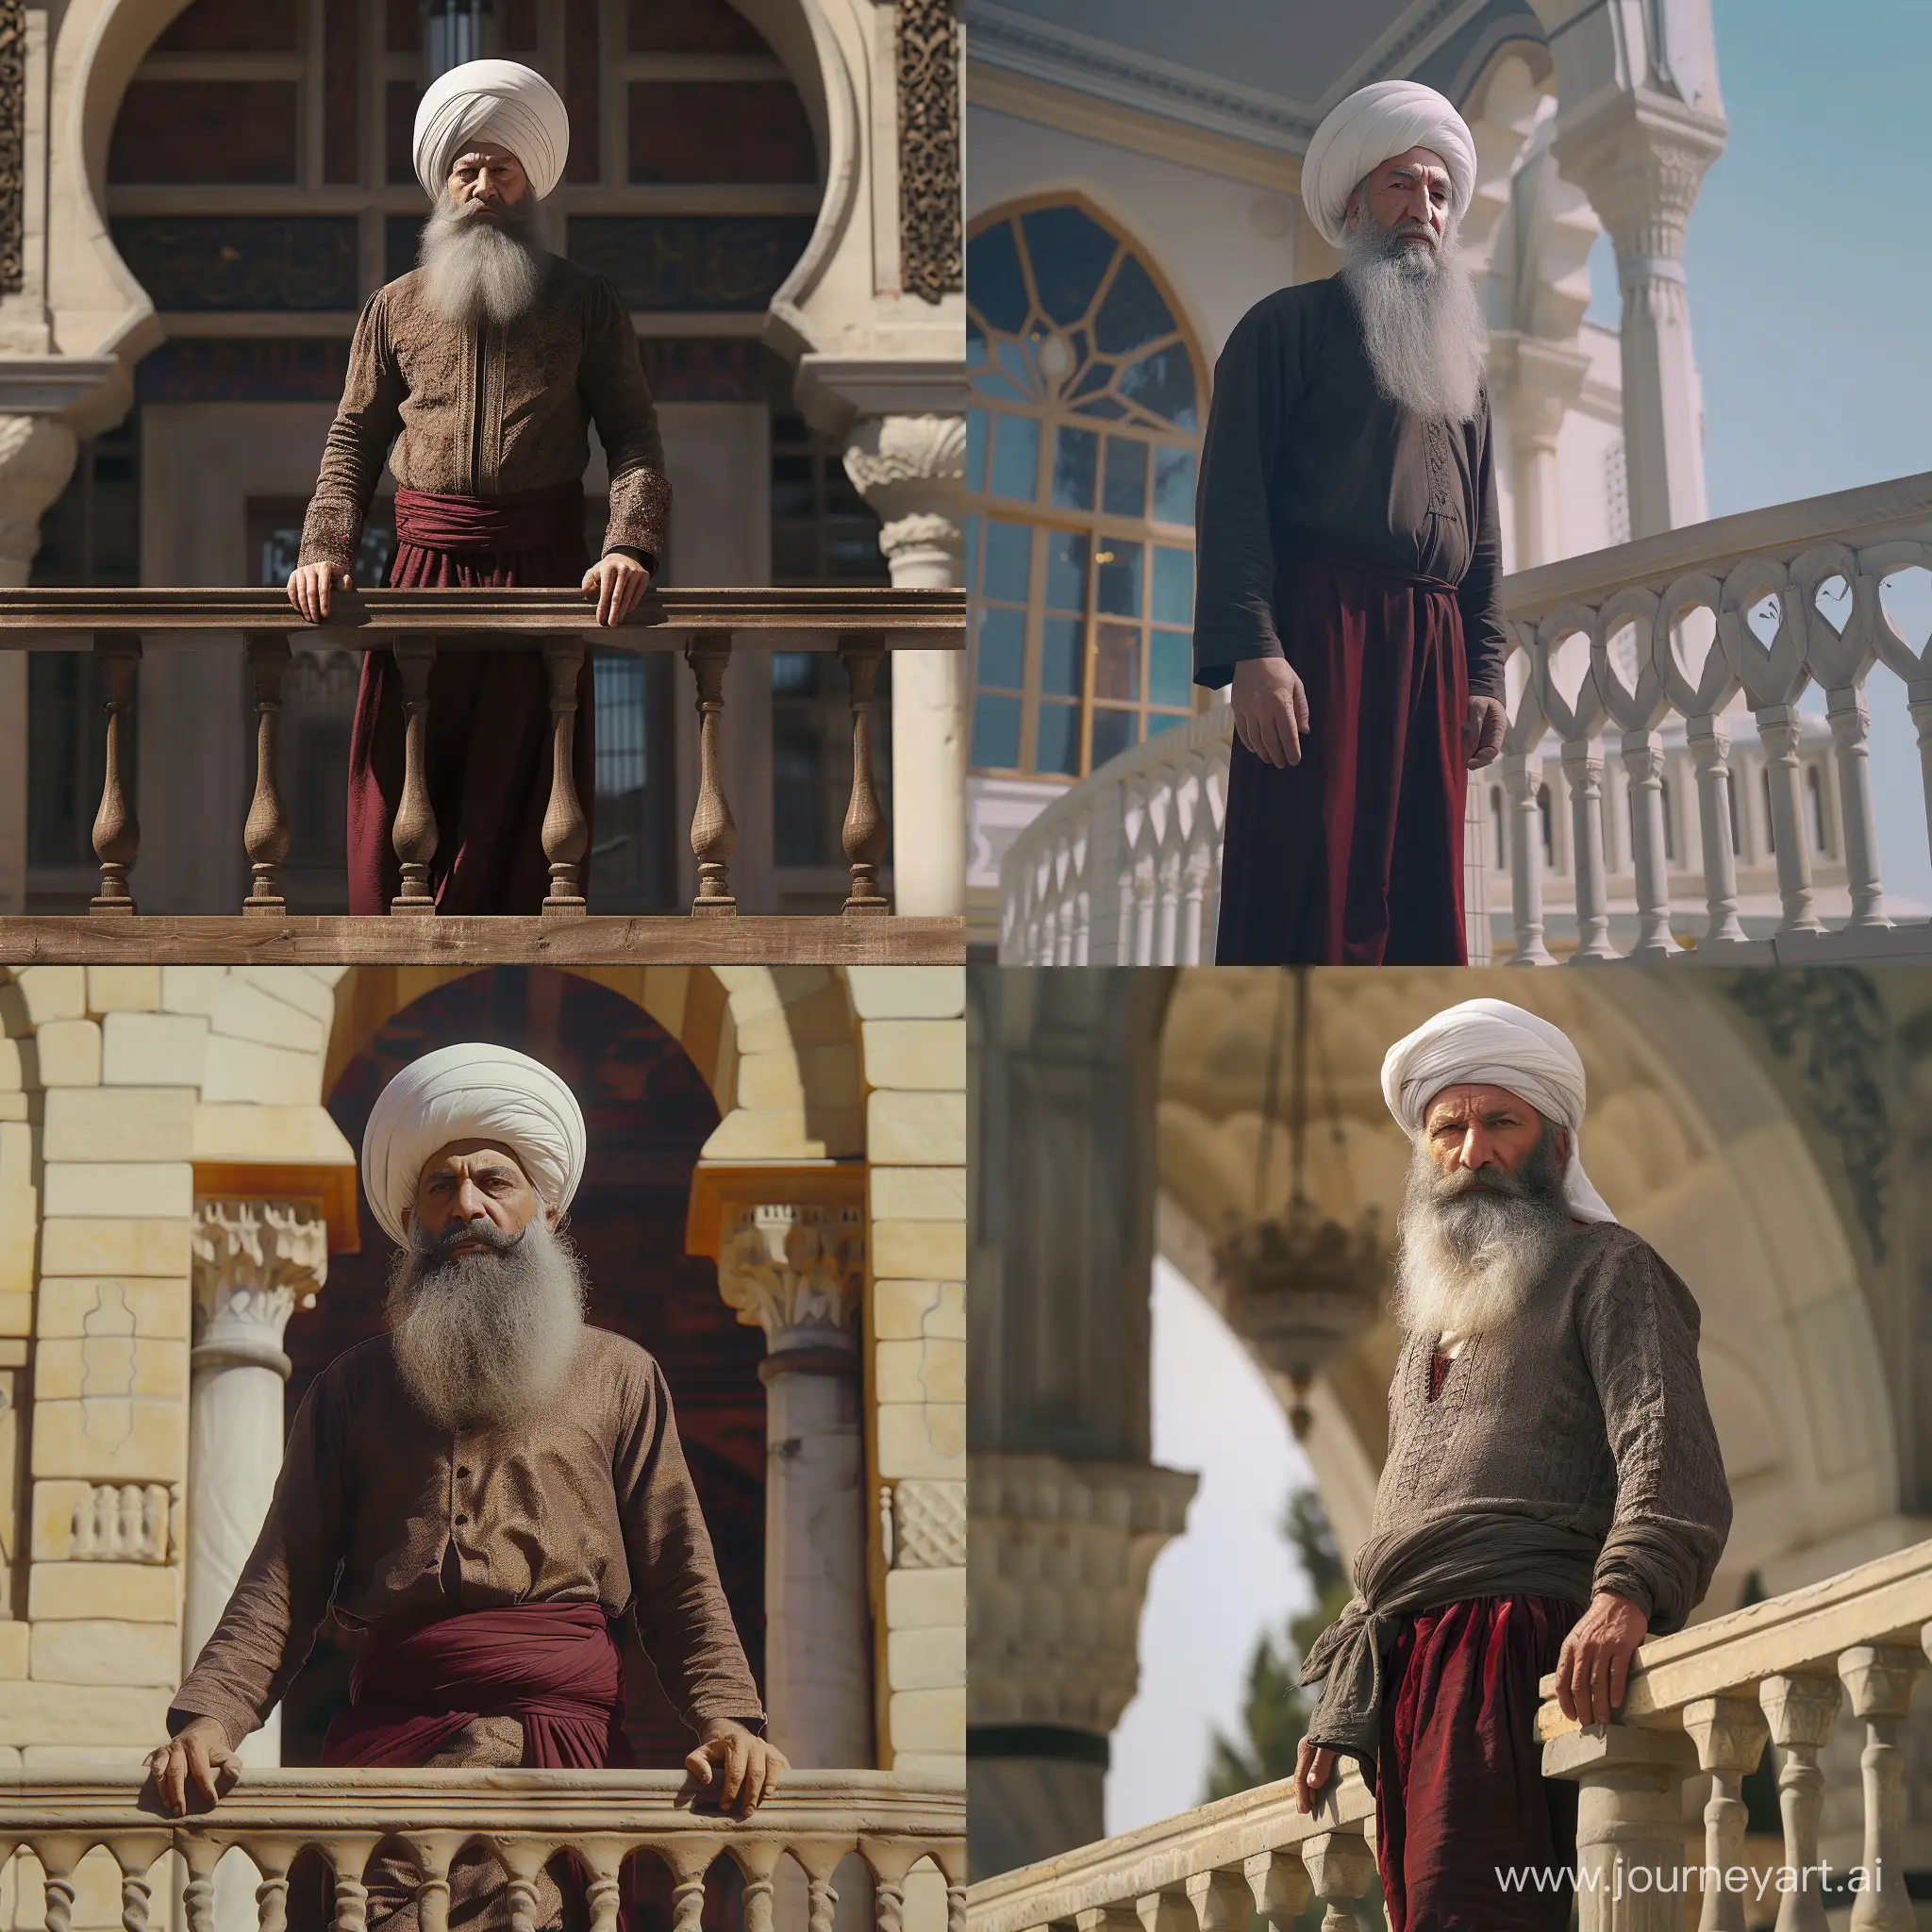 Mimar-Sinan-the-Master-Architect-Contemplates-from-the-Ottoman-Palace-Balcony